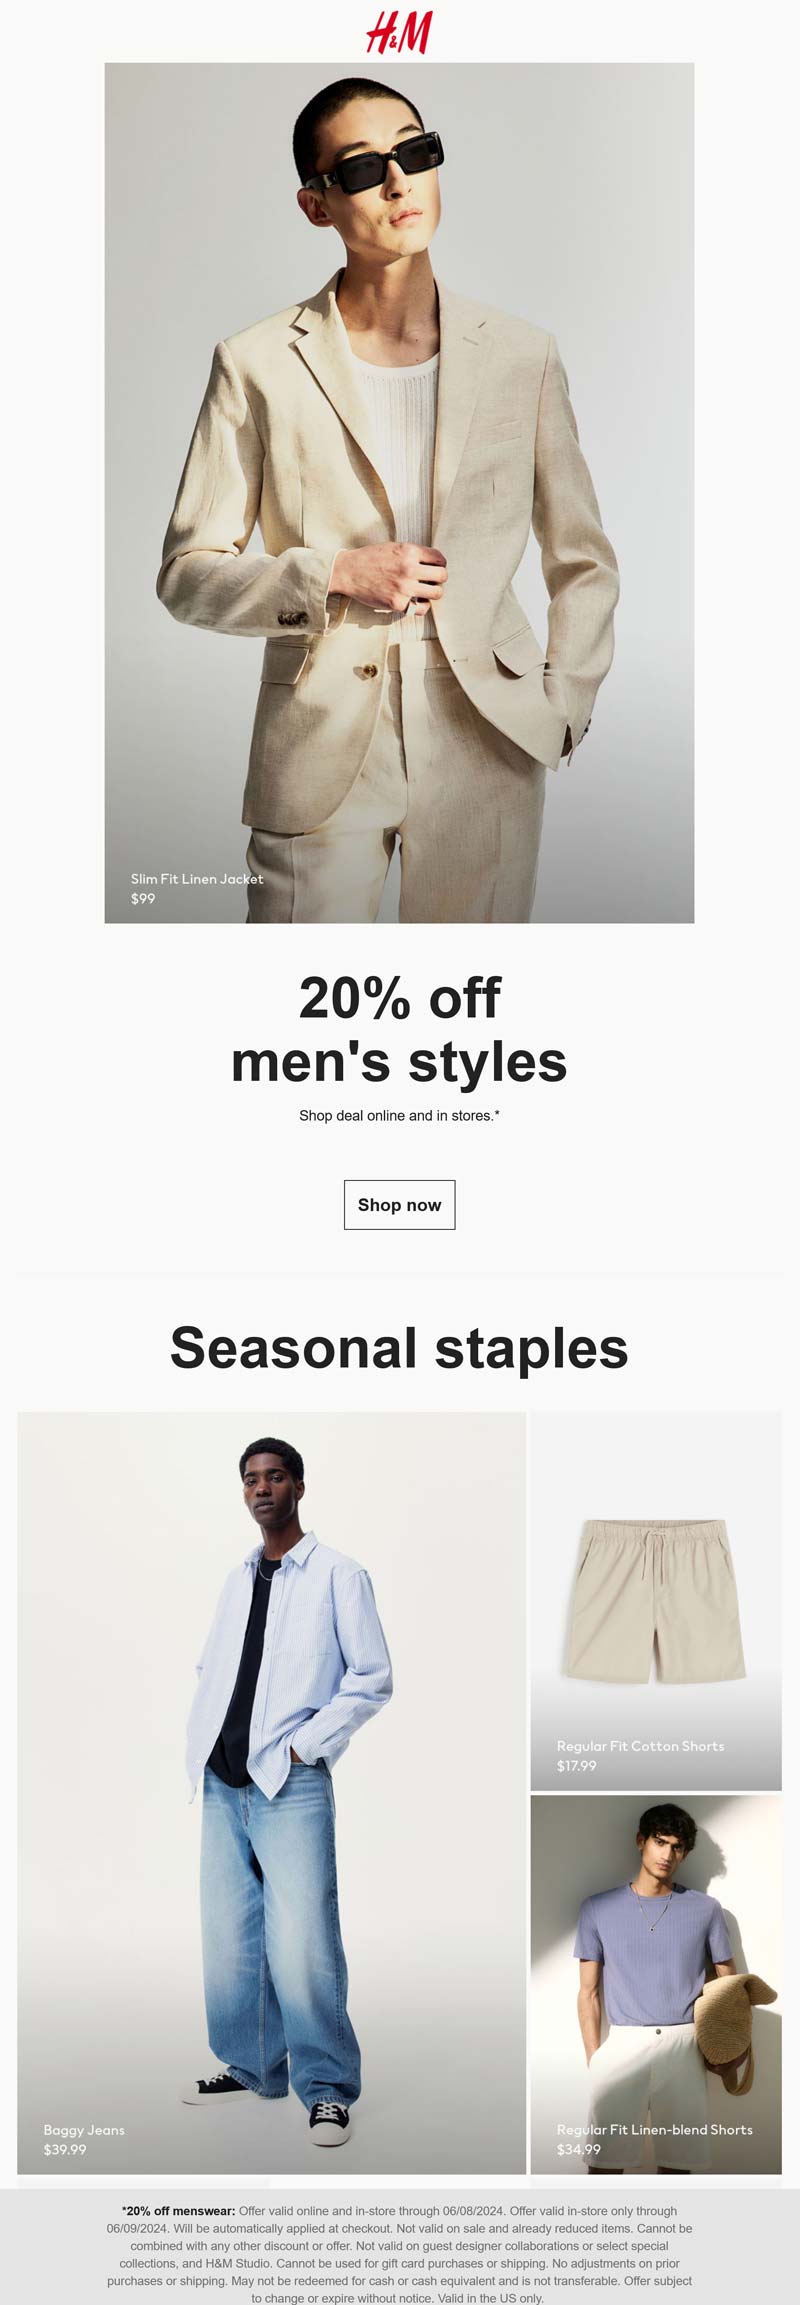 H&M stores Coupon  20% off menswear at H&M, ditto online #hm 